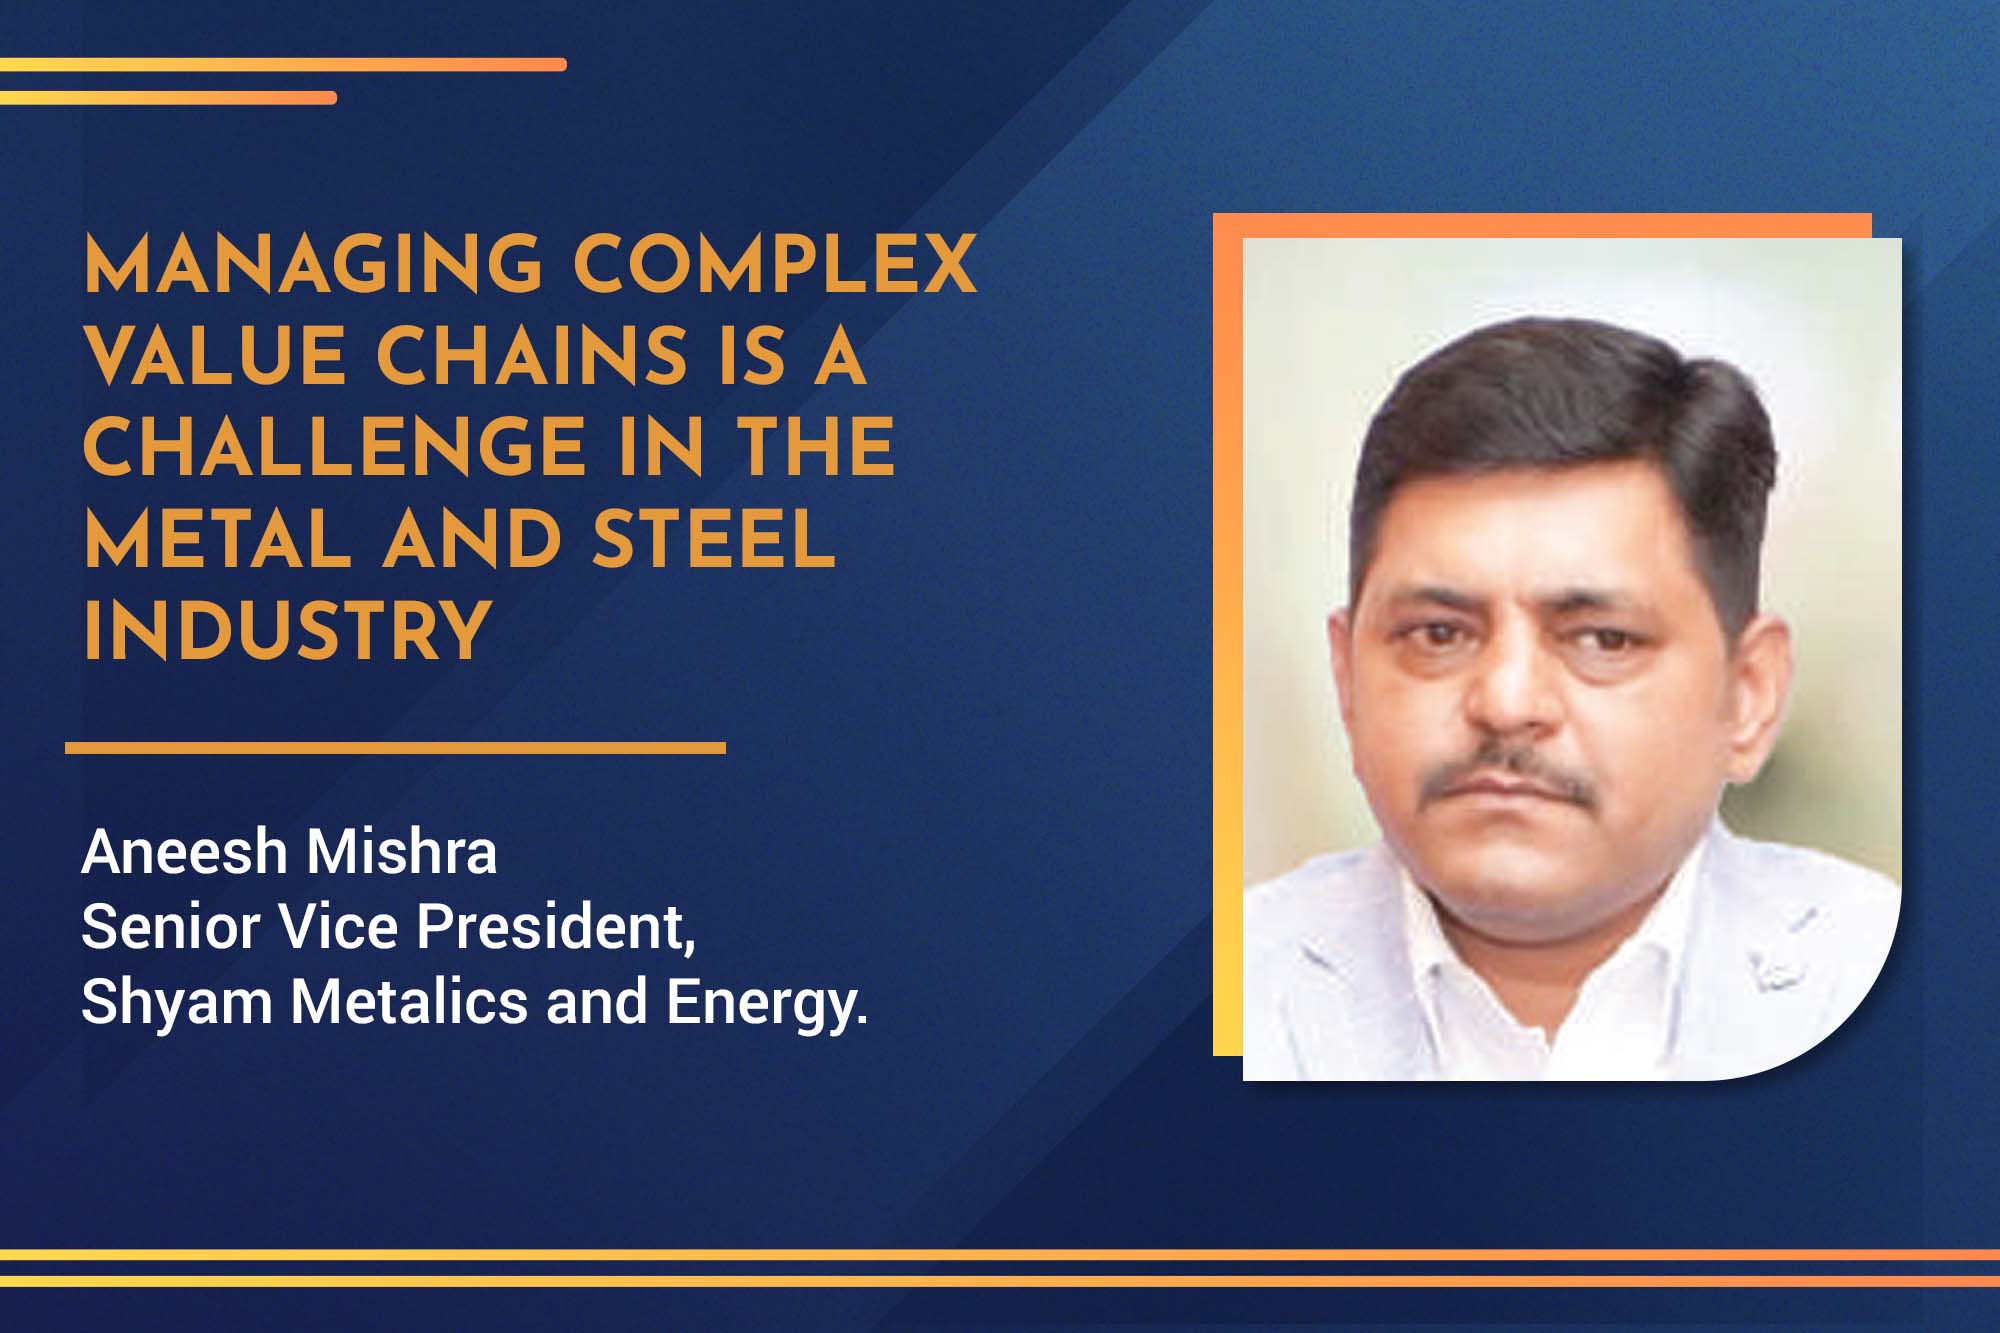 Managing complex value chains is a challenge in the metal and steel industry